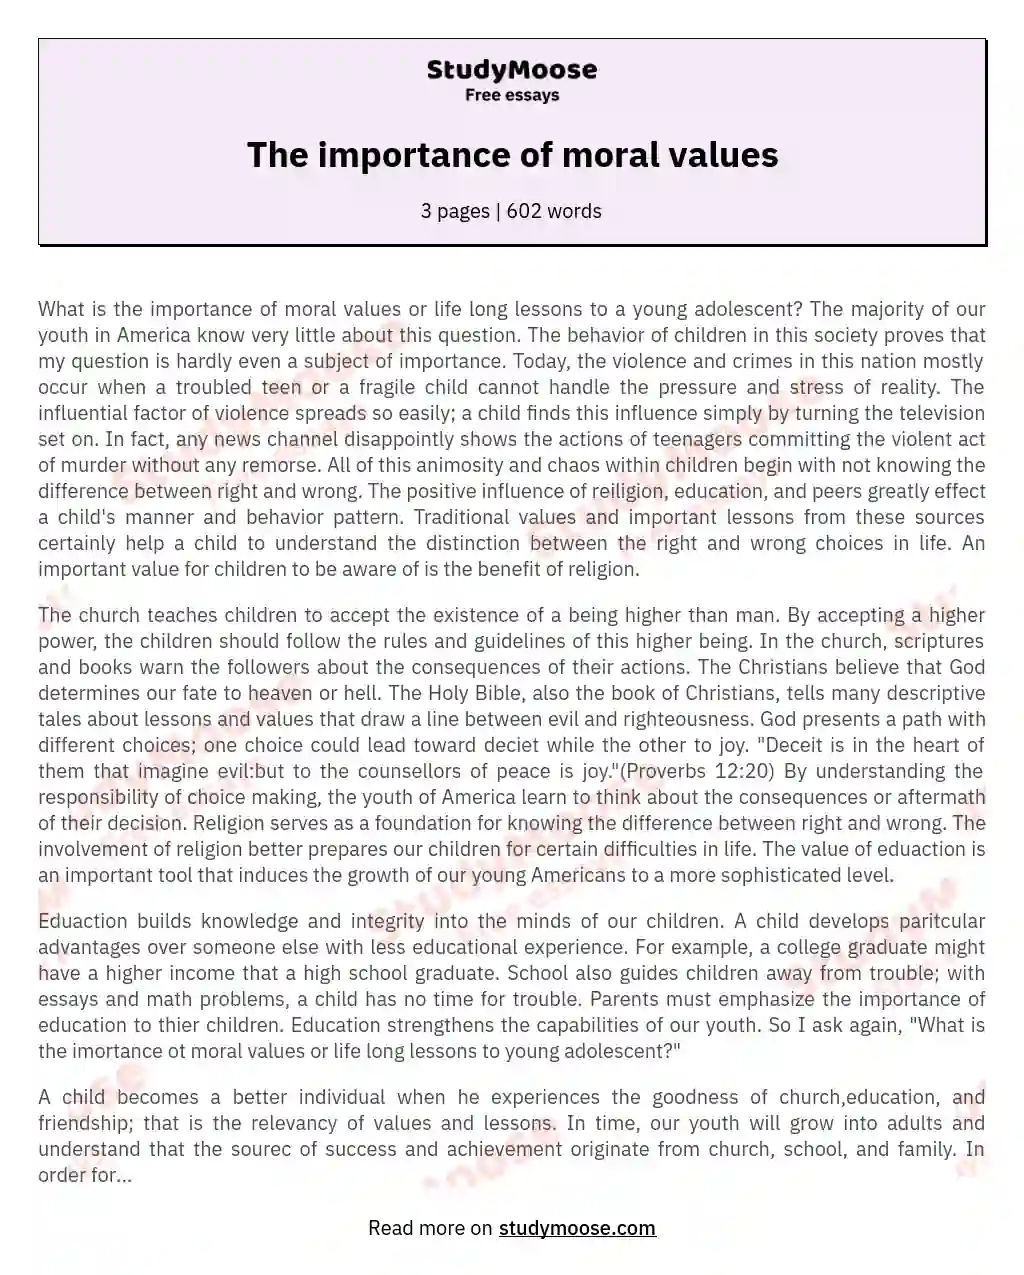 The importance of moral values essay